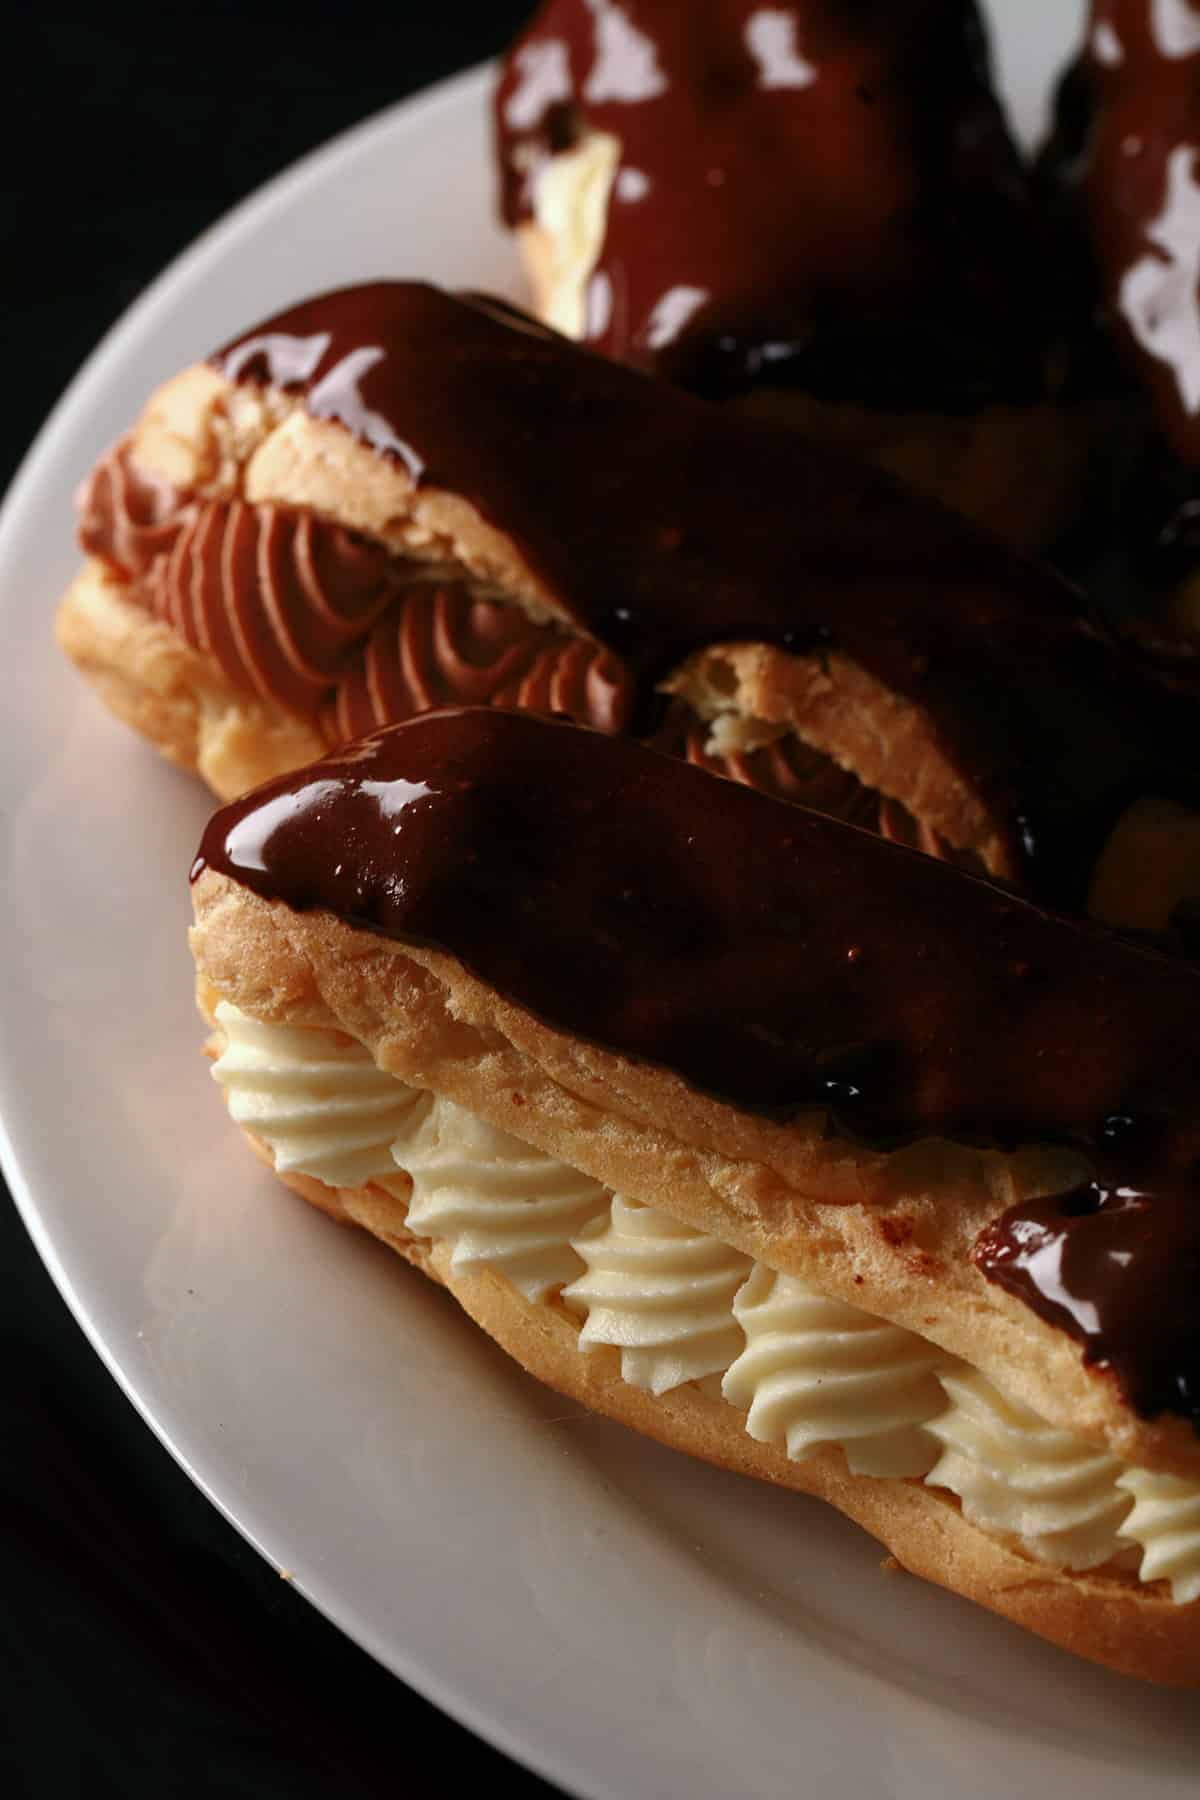 Several chocolate eclairs on a plate, with chocolate and vanilla cream fillings.